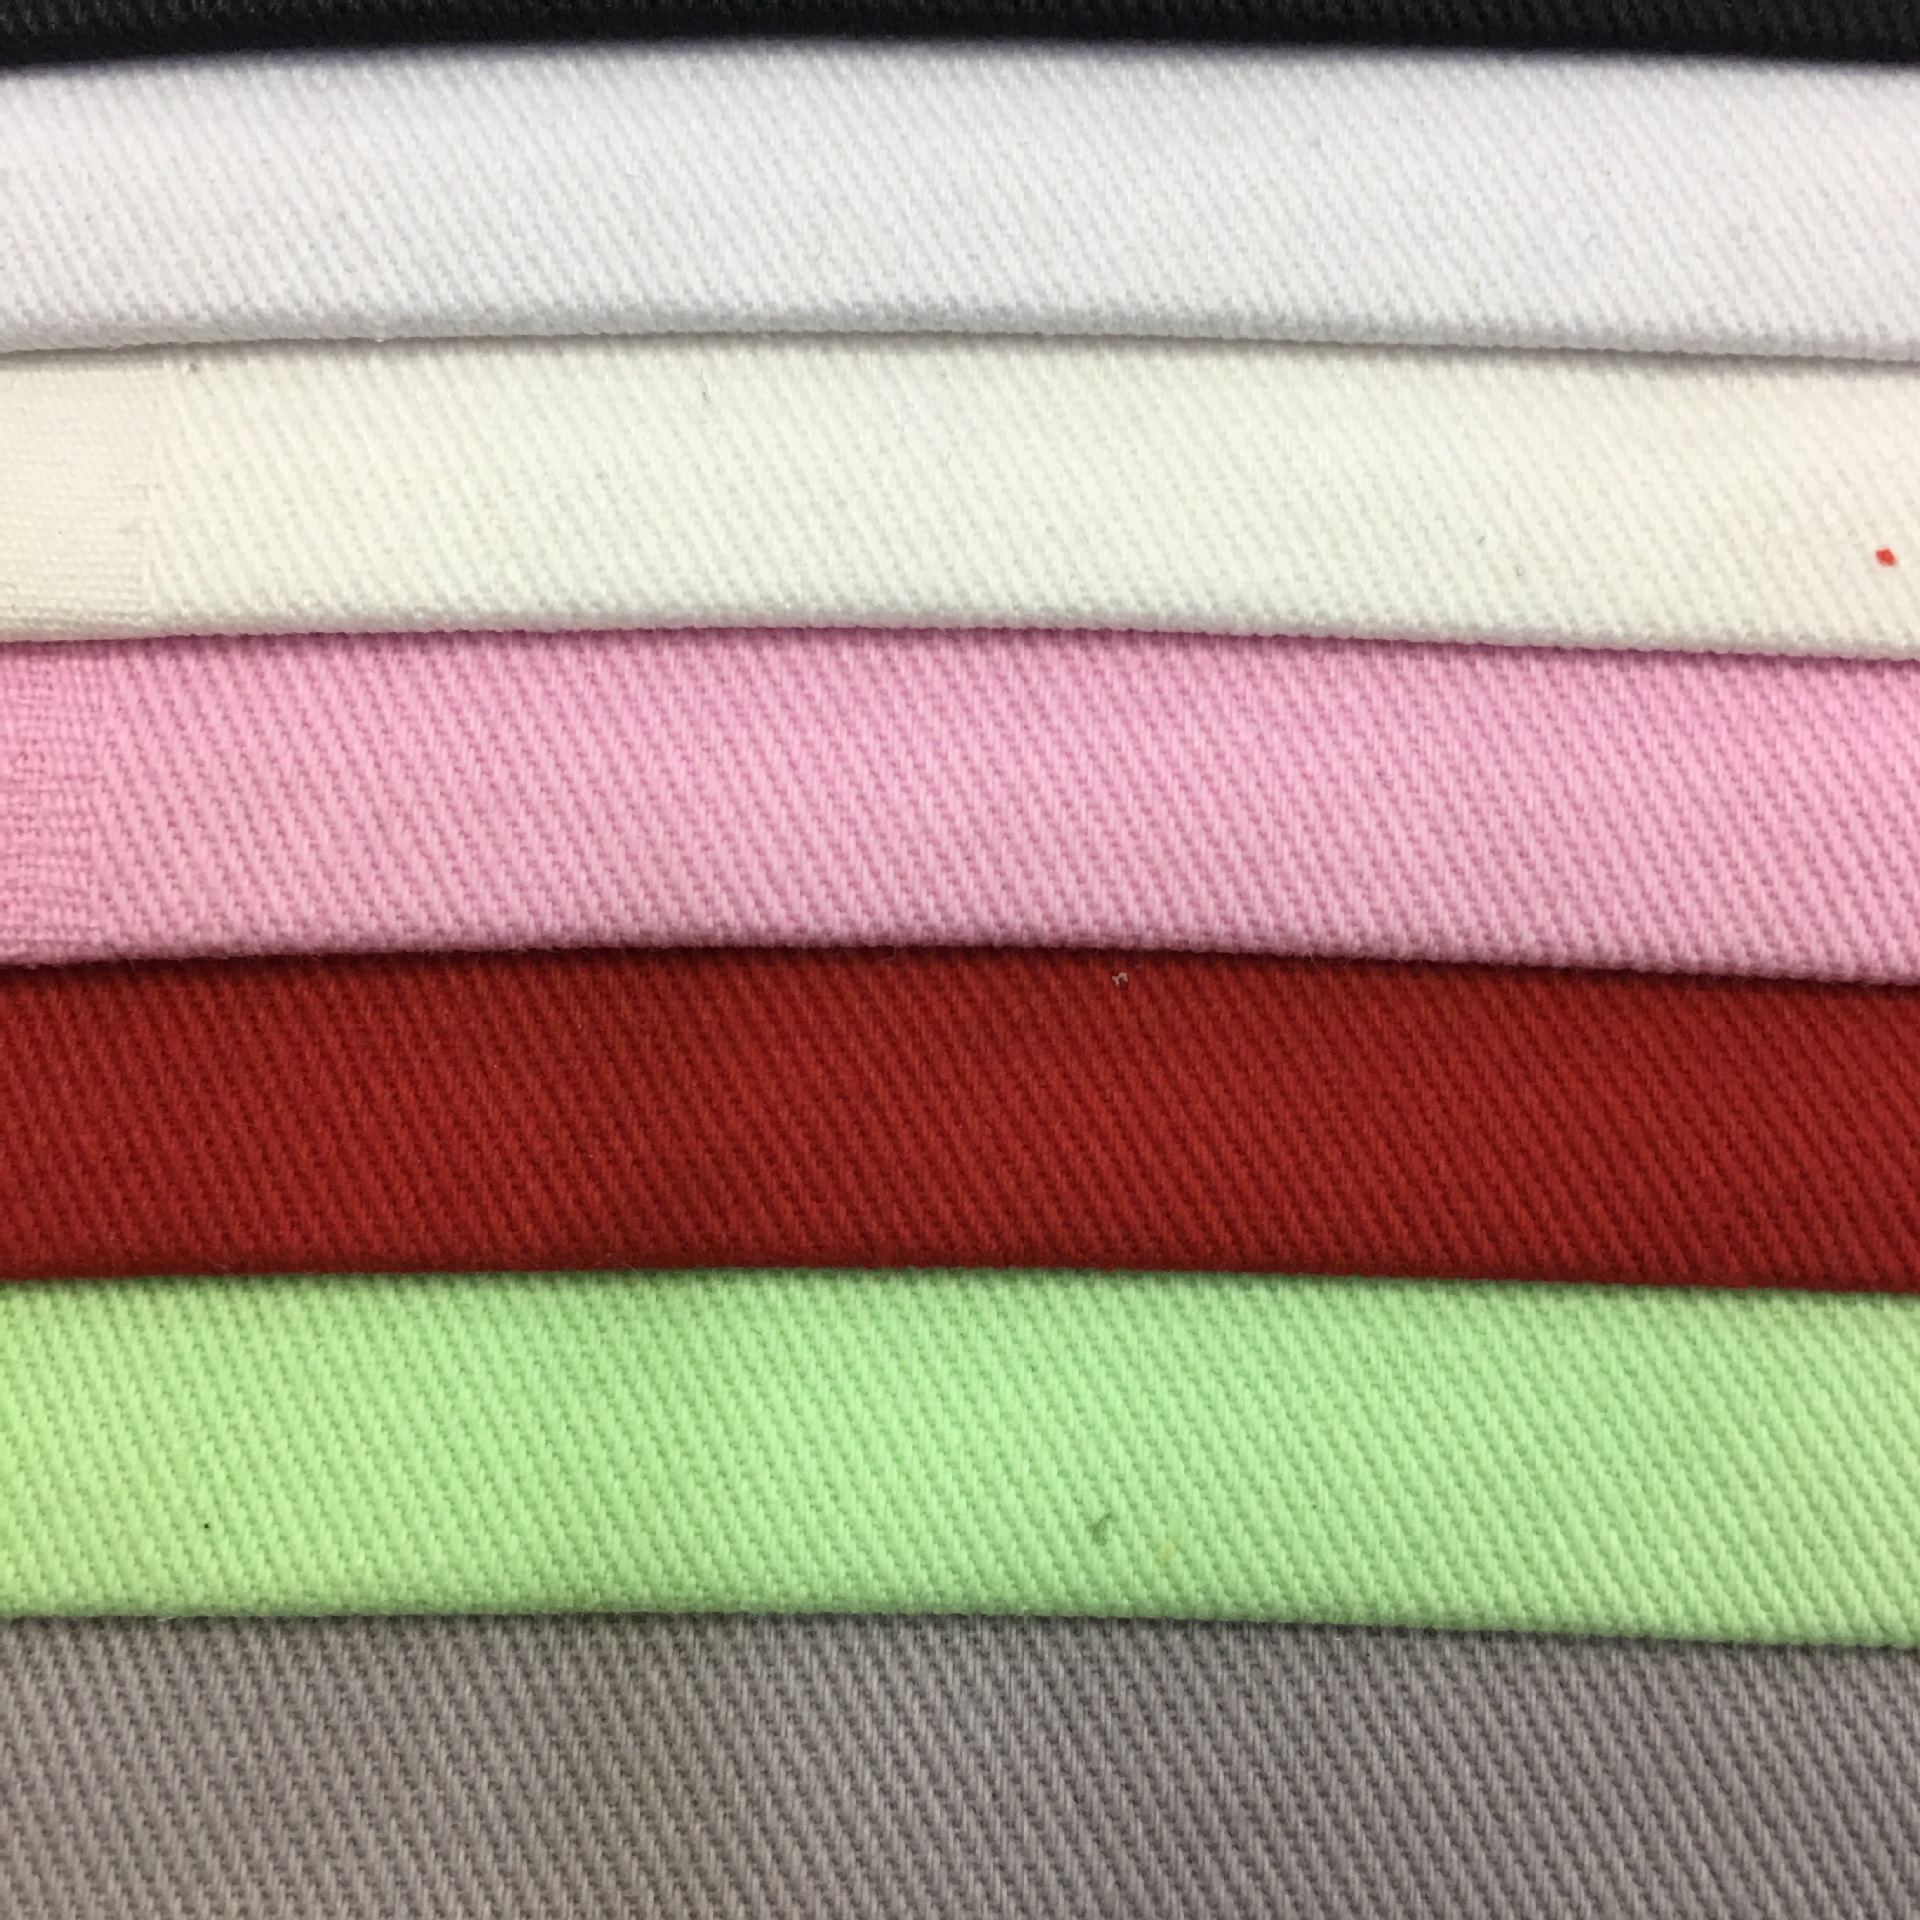 Cotton Twill dyed fabric-7S twill